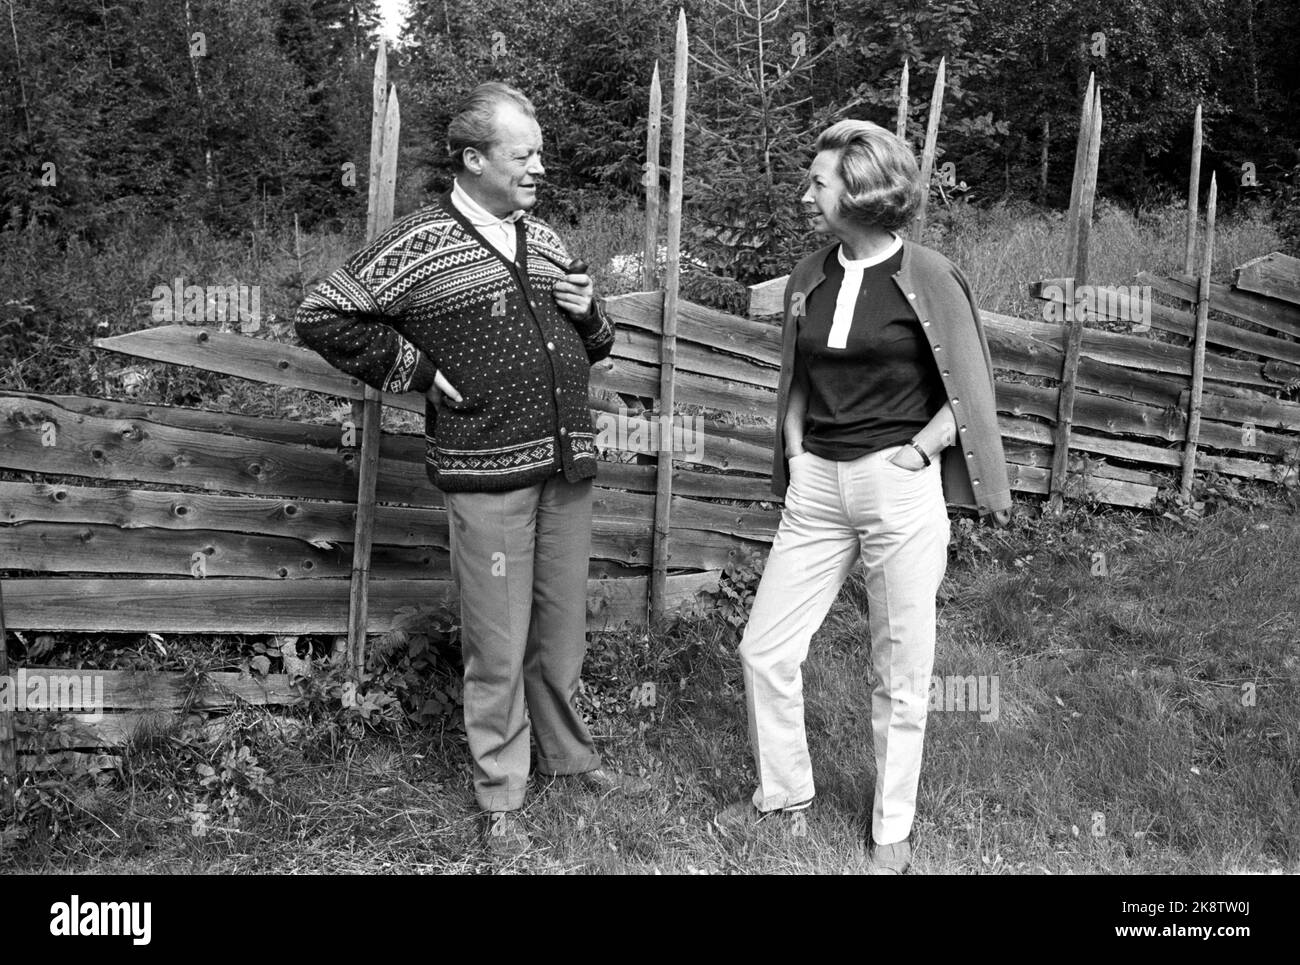 Hamar in the summer of 1970. West Germany's Chancellor Willy Brandt and Mrs. Rut Brandt bought a cabin in Vangsåsen in 1965 at Hamar, and here they spend their summer holidays with the family. Here the couple poses at a skigard near the cabin. Photo: Ivar Aaserud / Current / NTB Stock Photo